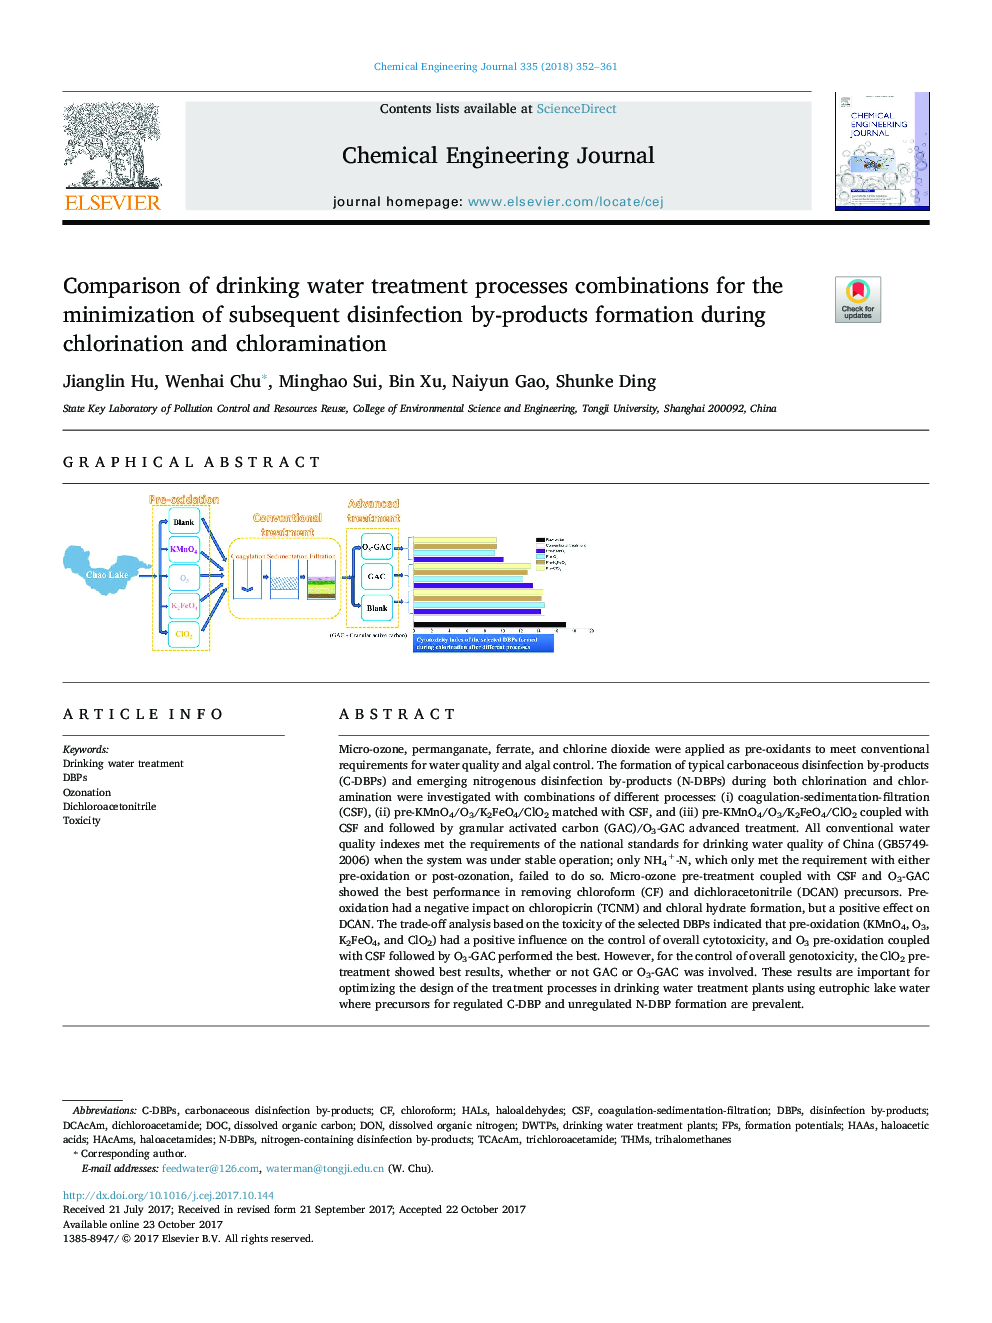 Comparison of drinking water treatment processes combinations for the minimization of subsequent disinfection by-products formation during chlorination and chloramination